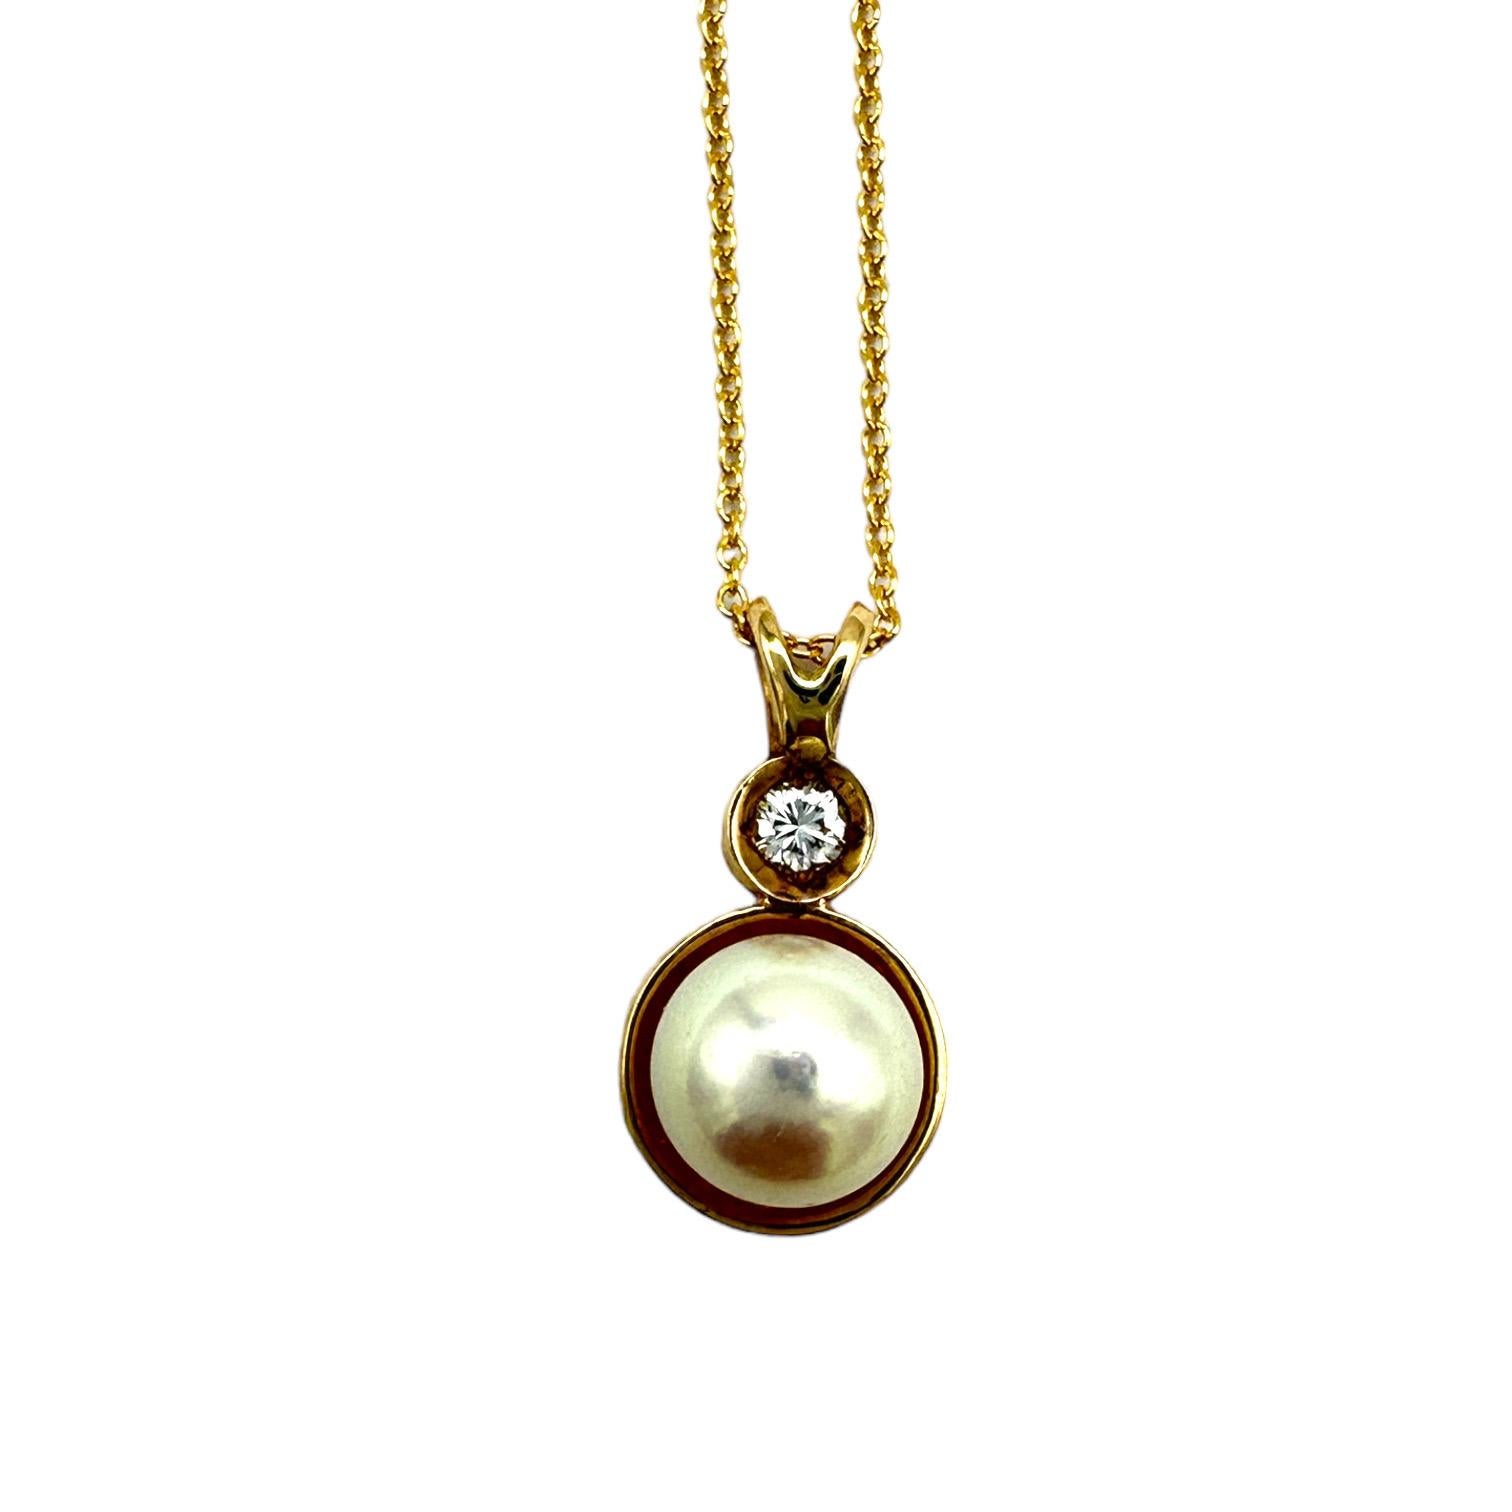 This AAA Quality cultured pearl pendant is sure to make a statement. Its 8.20mm size provides a perfect balance between visibility and subtlety. Crafted with the finest materials, the pendant truly shines with AAA quality cultured pearls and